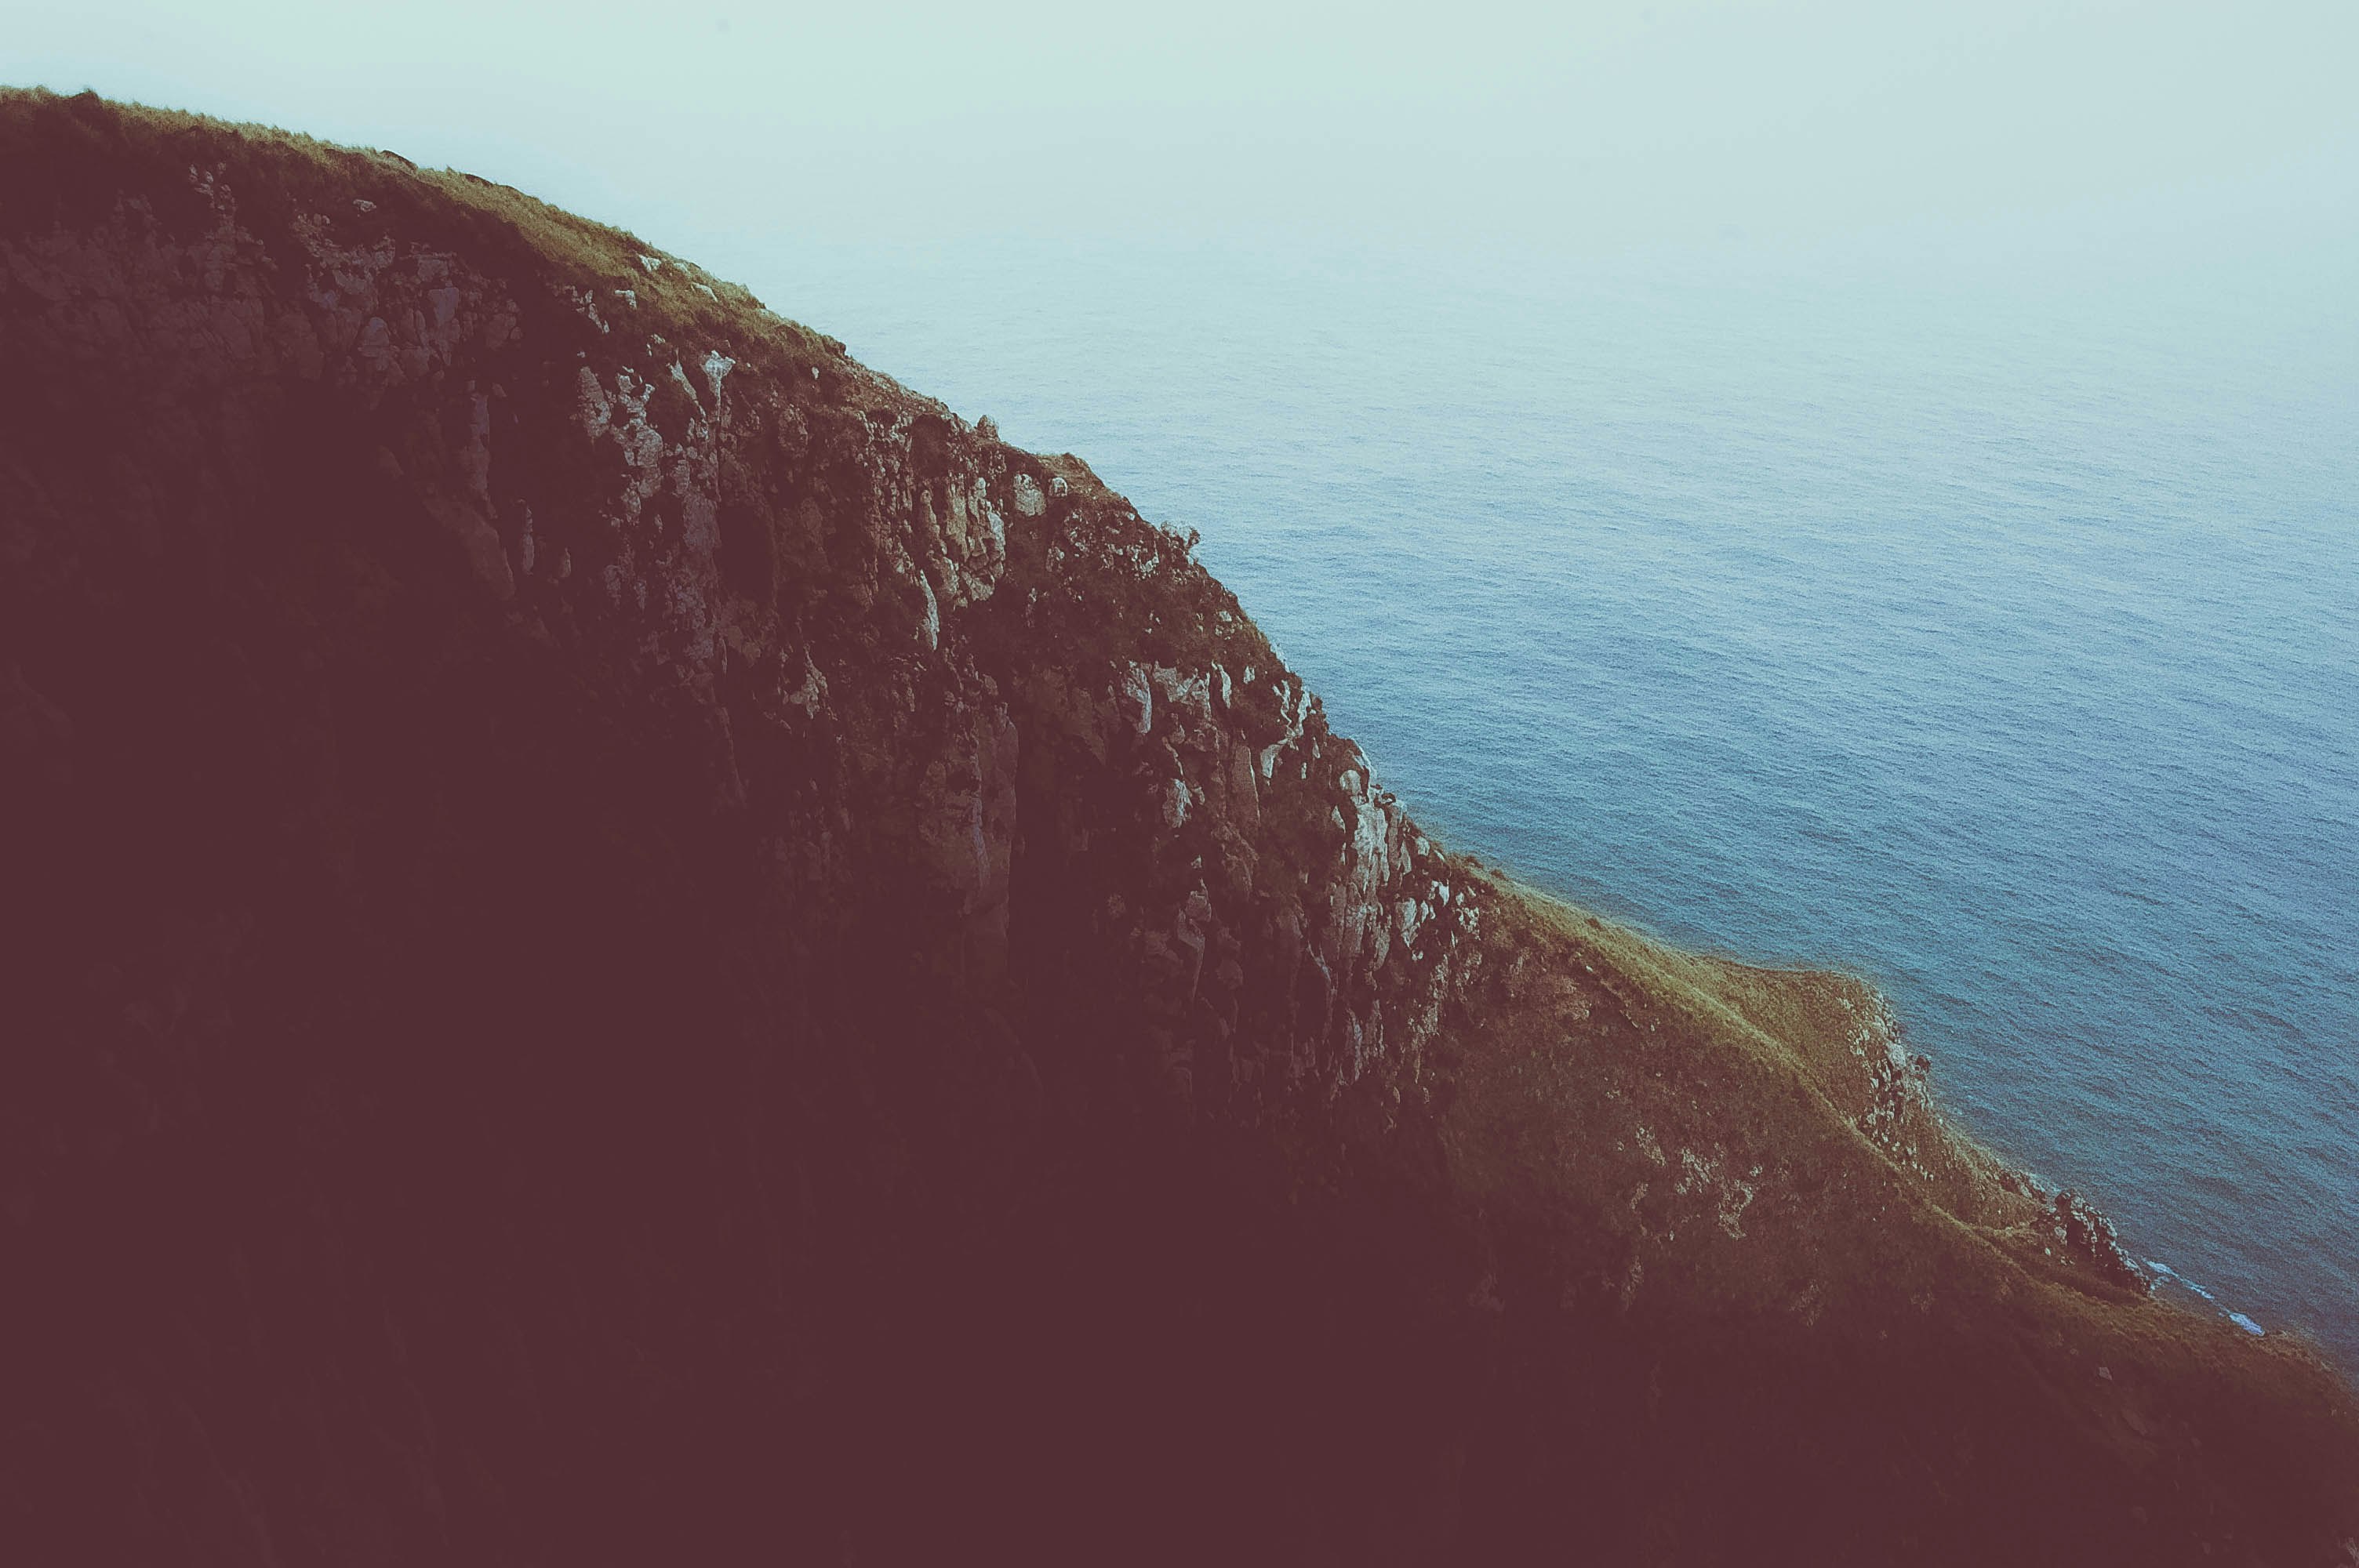 photo of cliff near calm sea during daytime